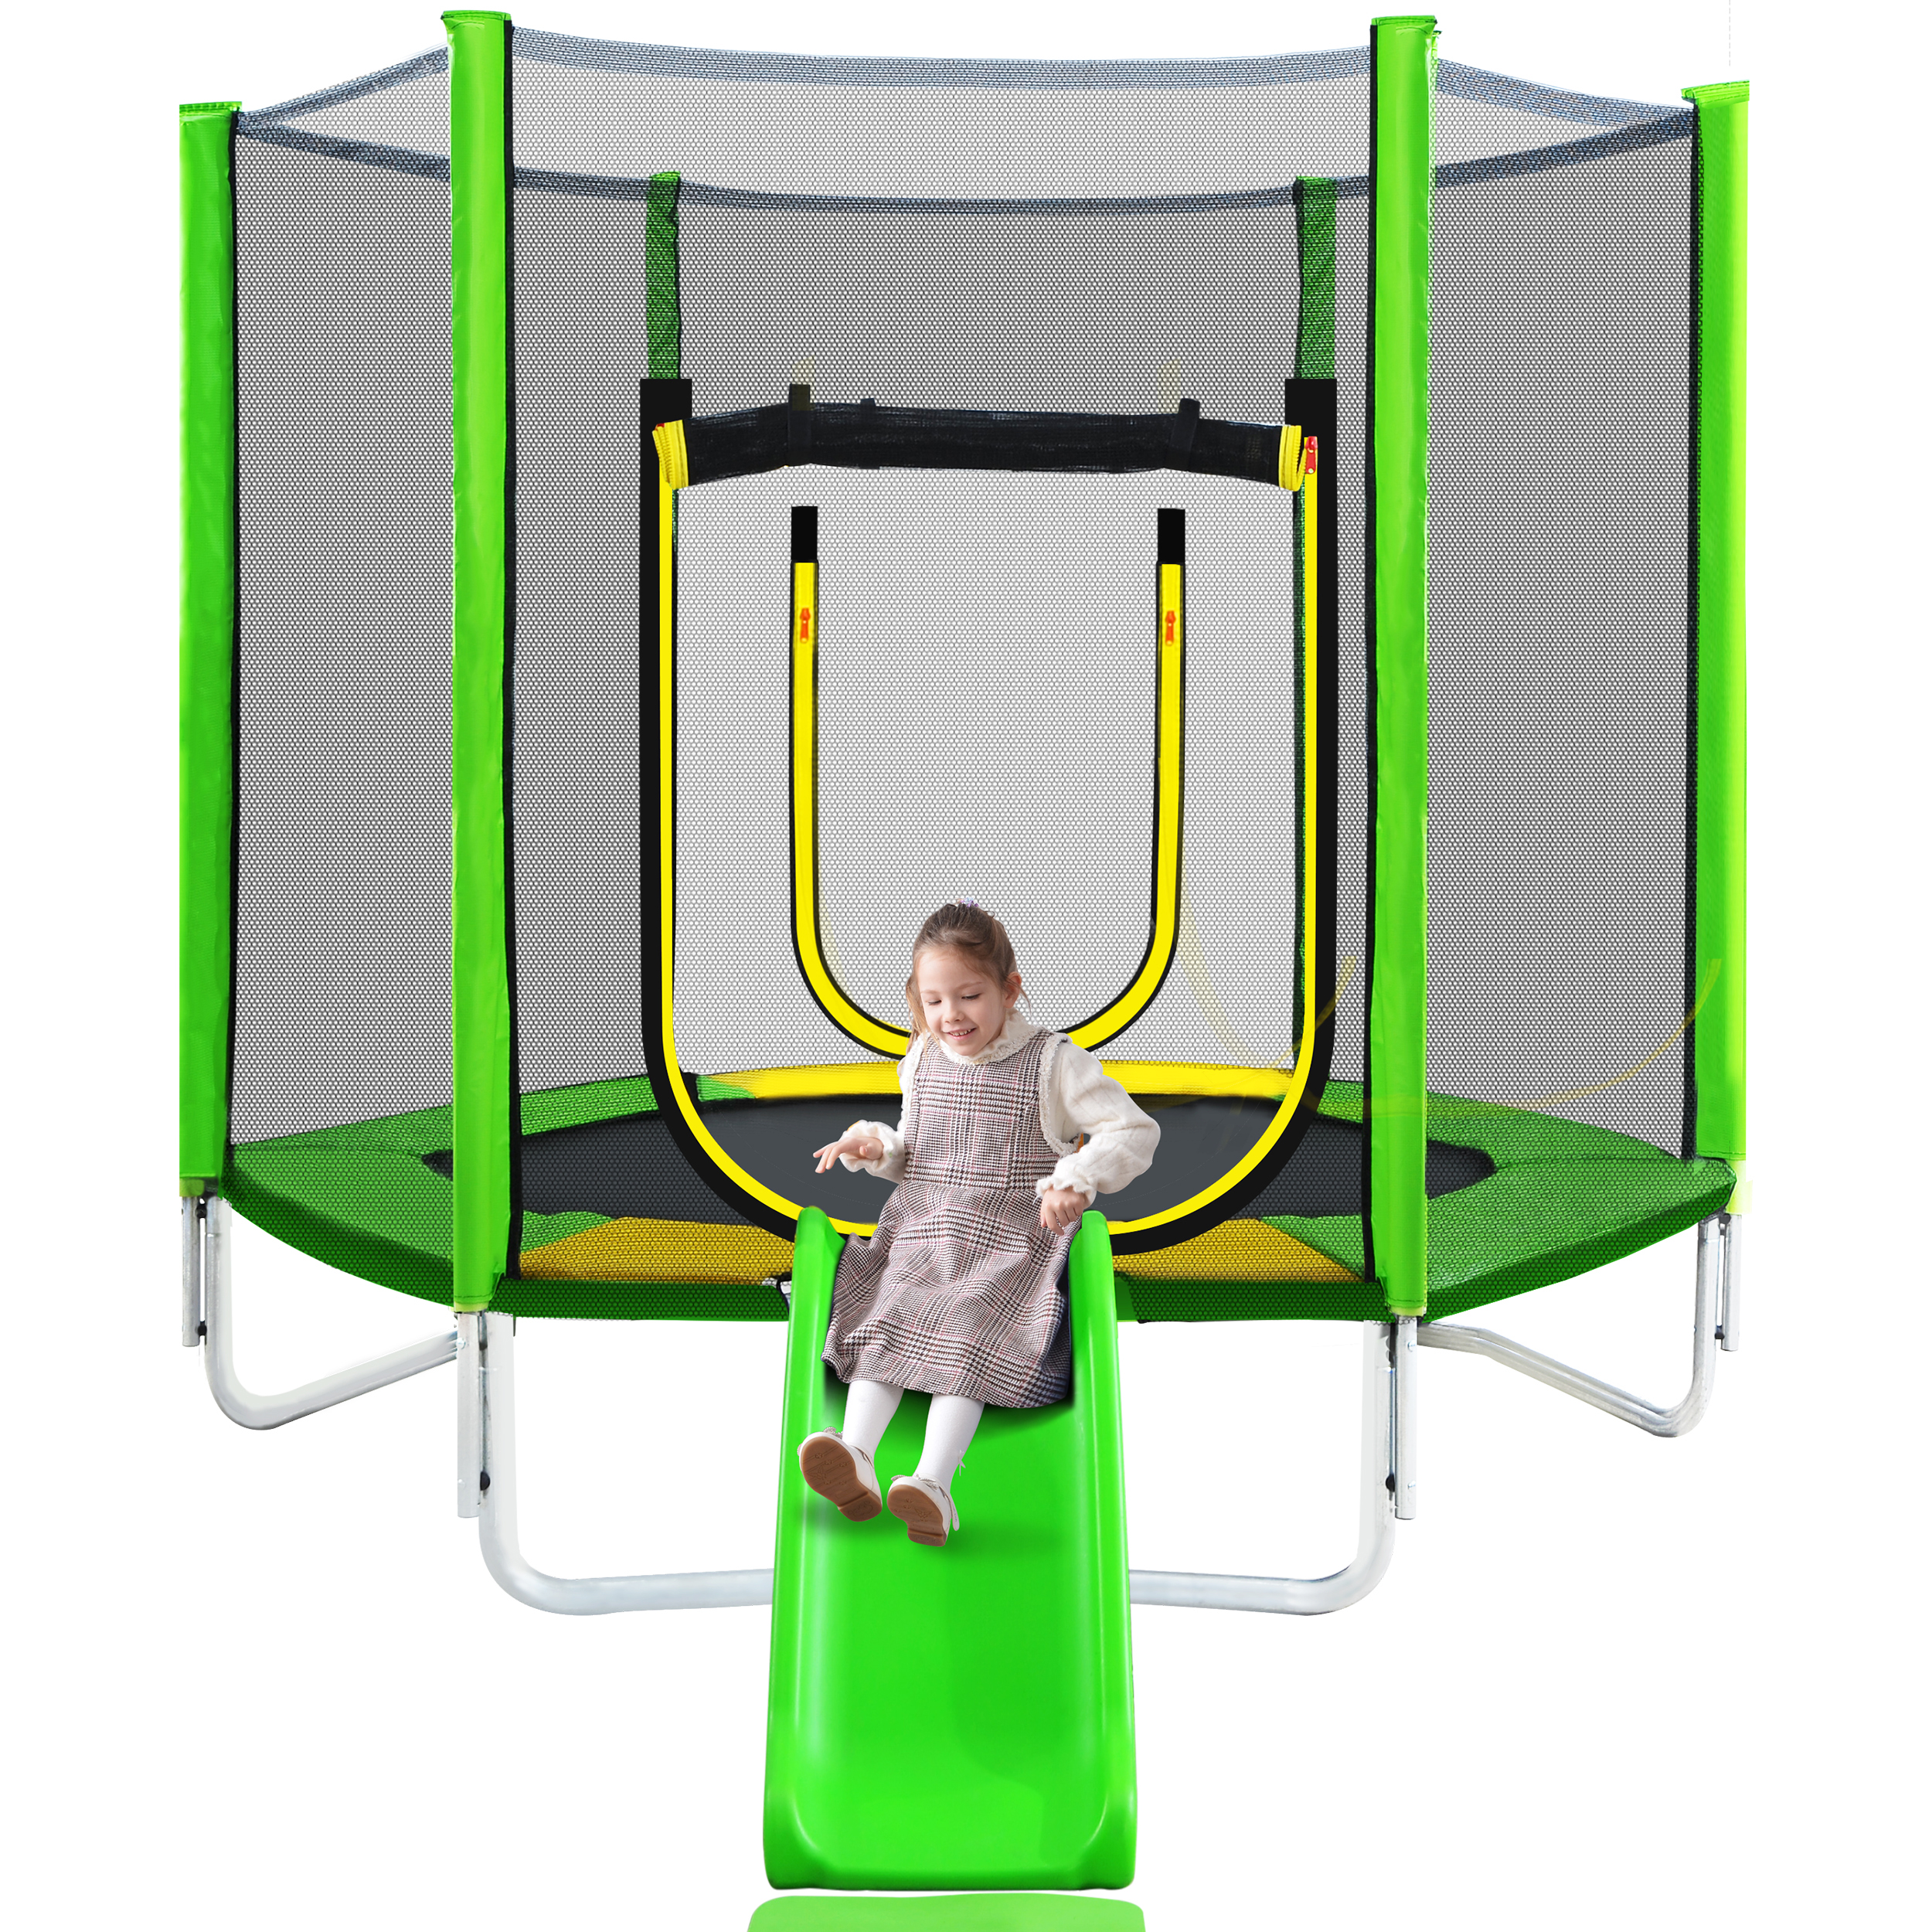 7FT Trampoline for Kids with Safety Enclosure Net, Slide and Ladder, Easy Assembly Round Outdoor Recreational Trampoline-Boyel Living